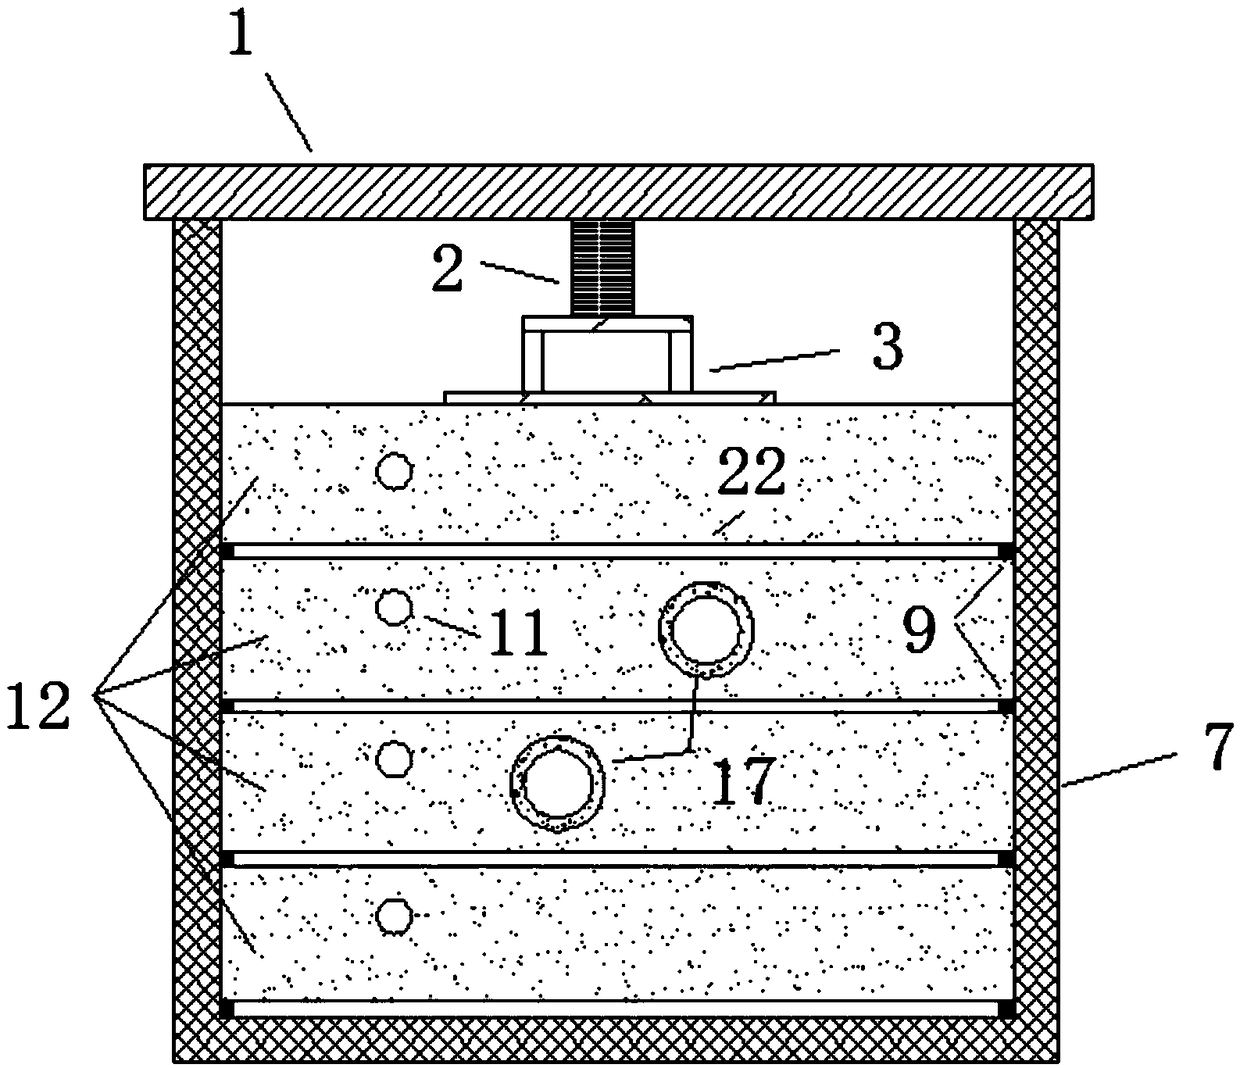 Indoor model testing device and method for influences of ground loading on existing subway tunnel